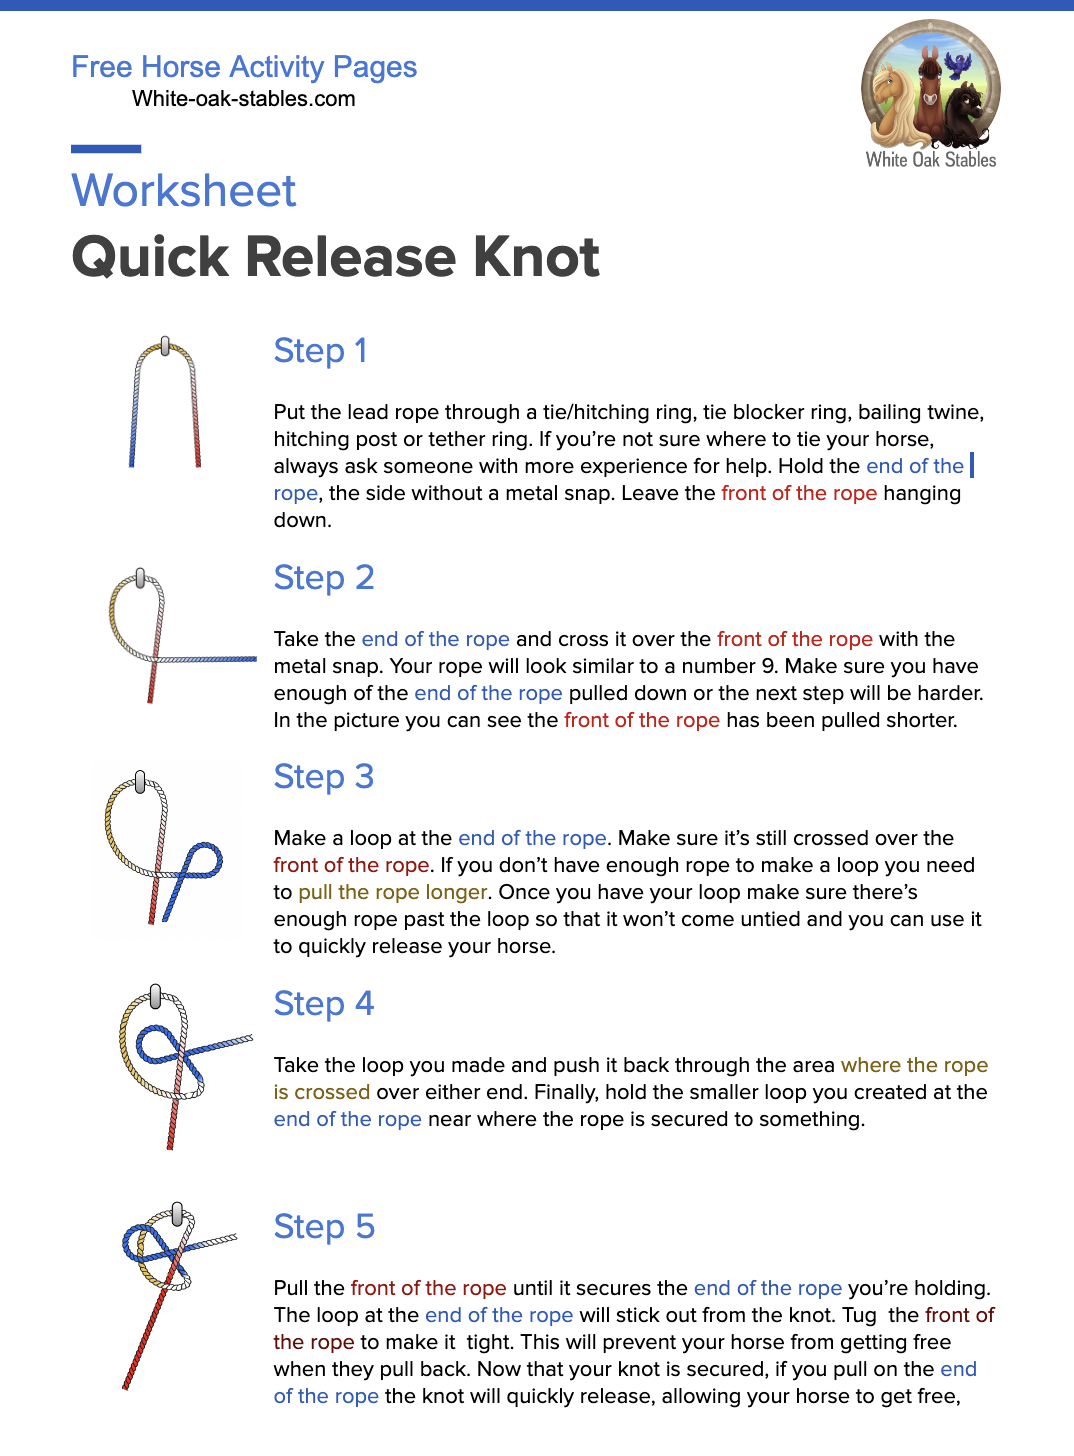 Quick Release Knot